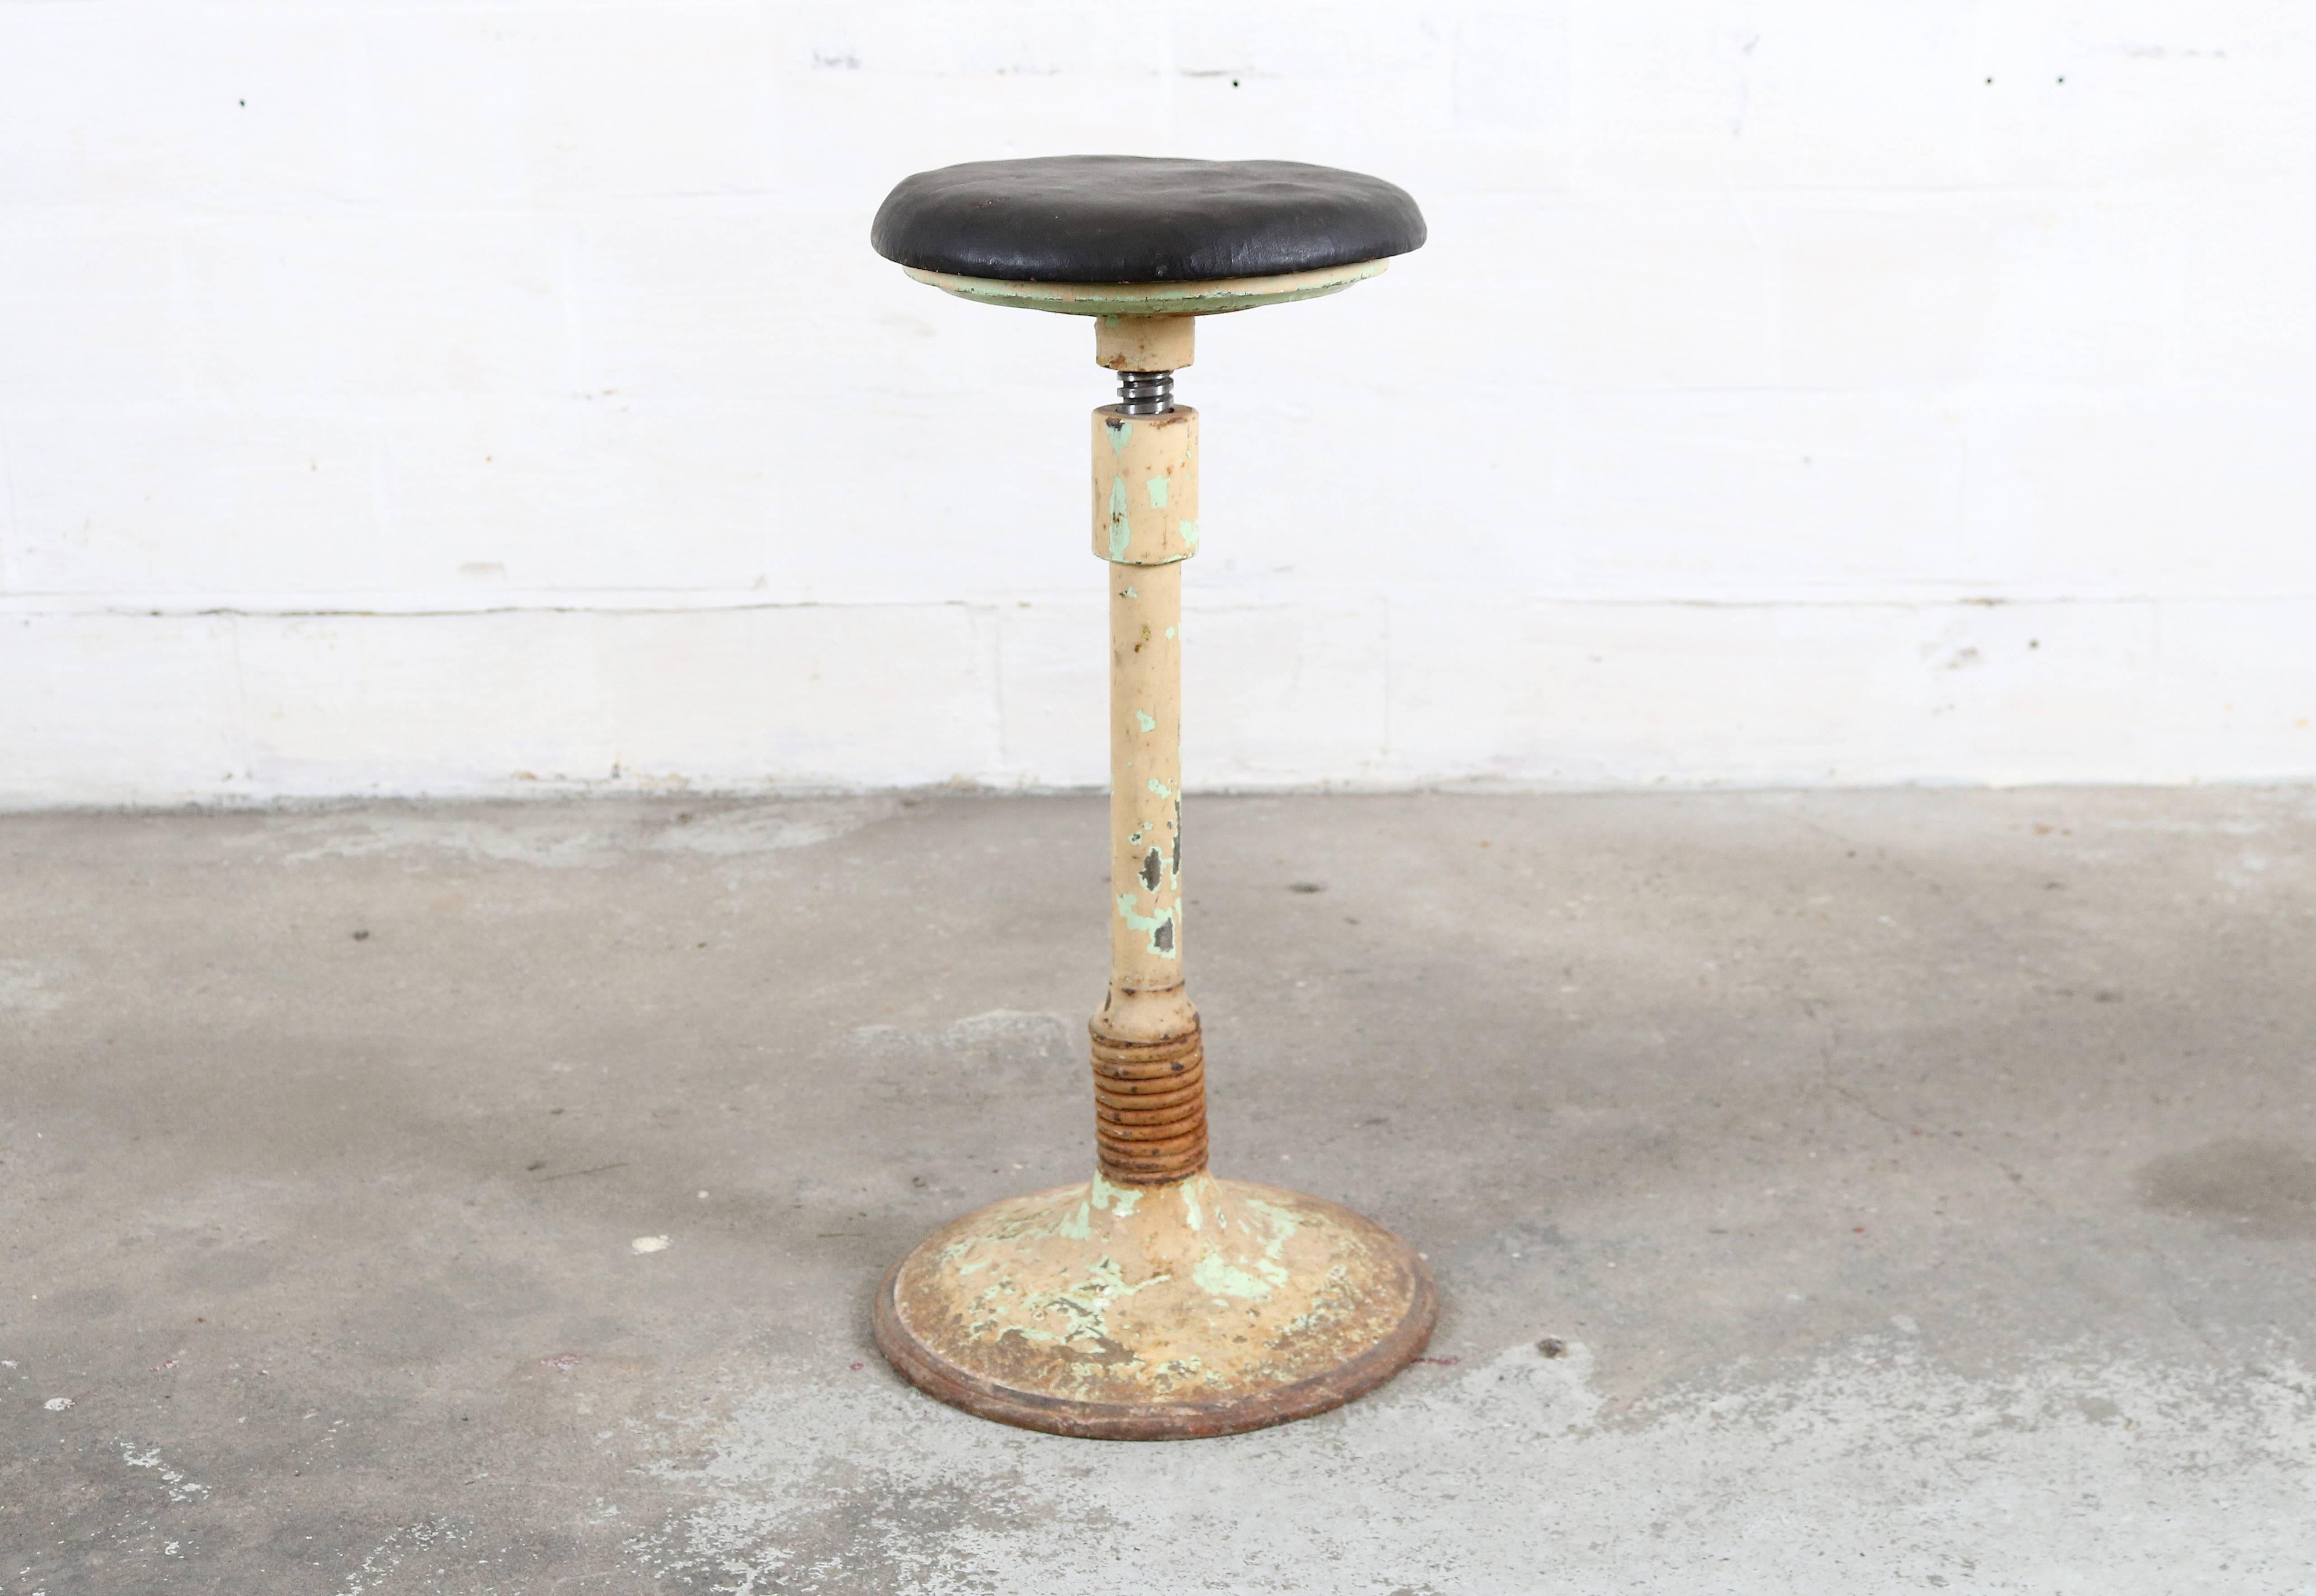 Industrial stool with spring.
Has a beautiful patina.